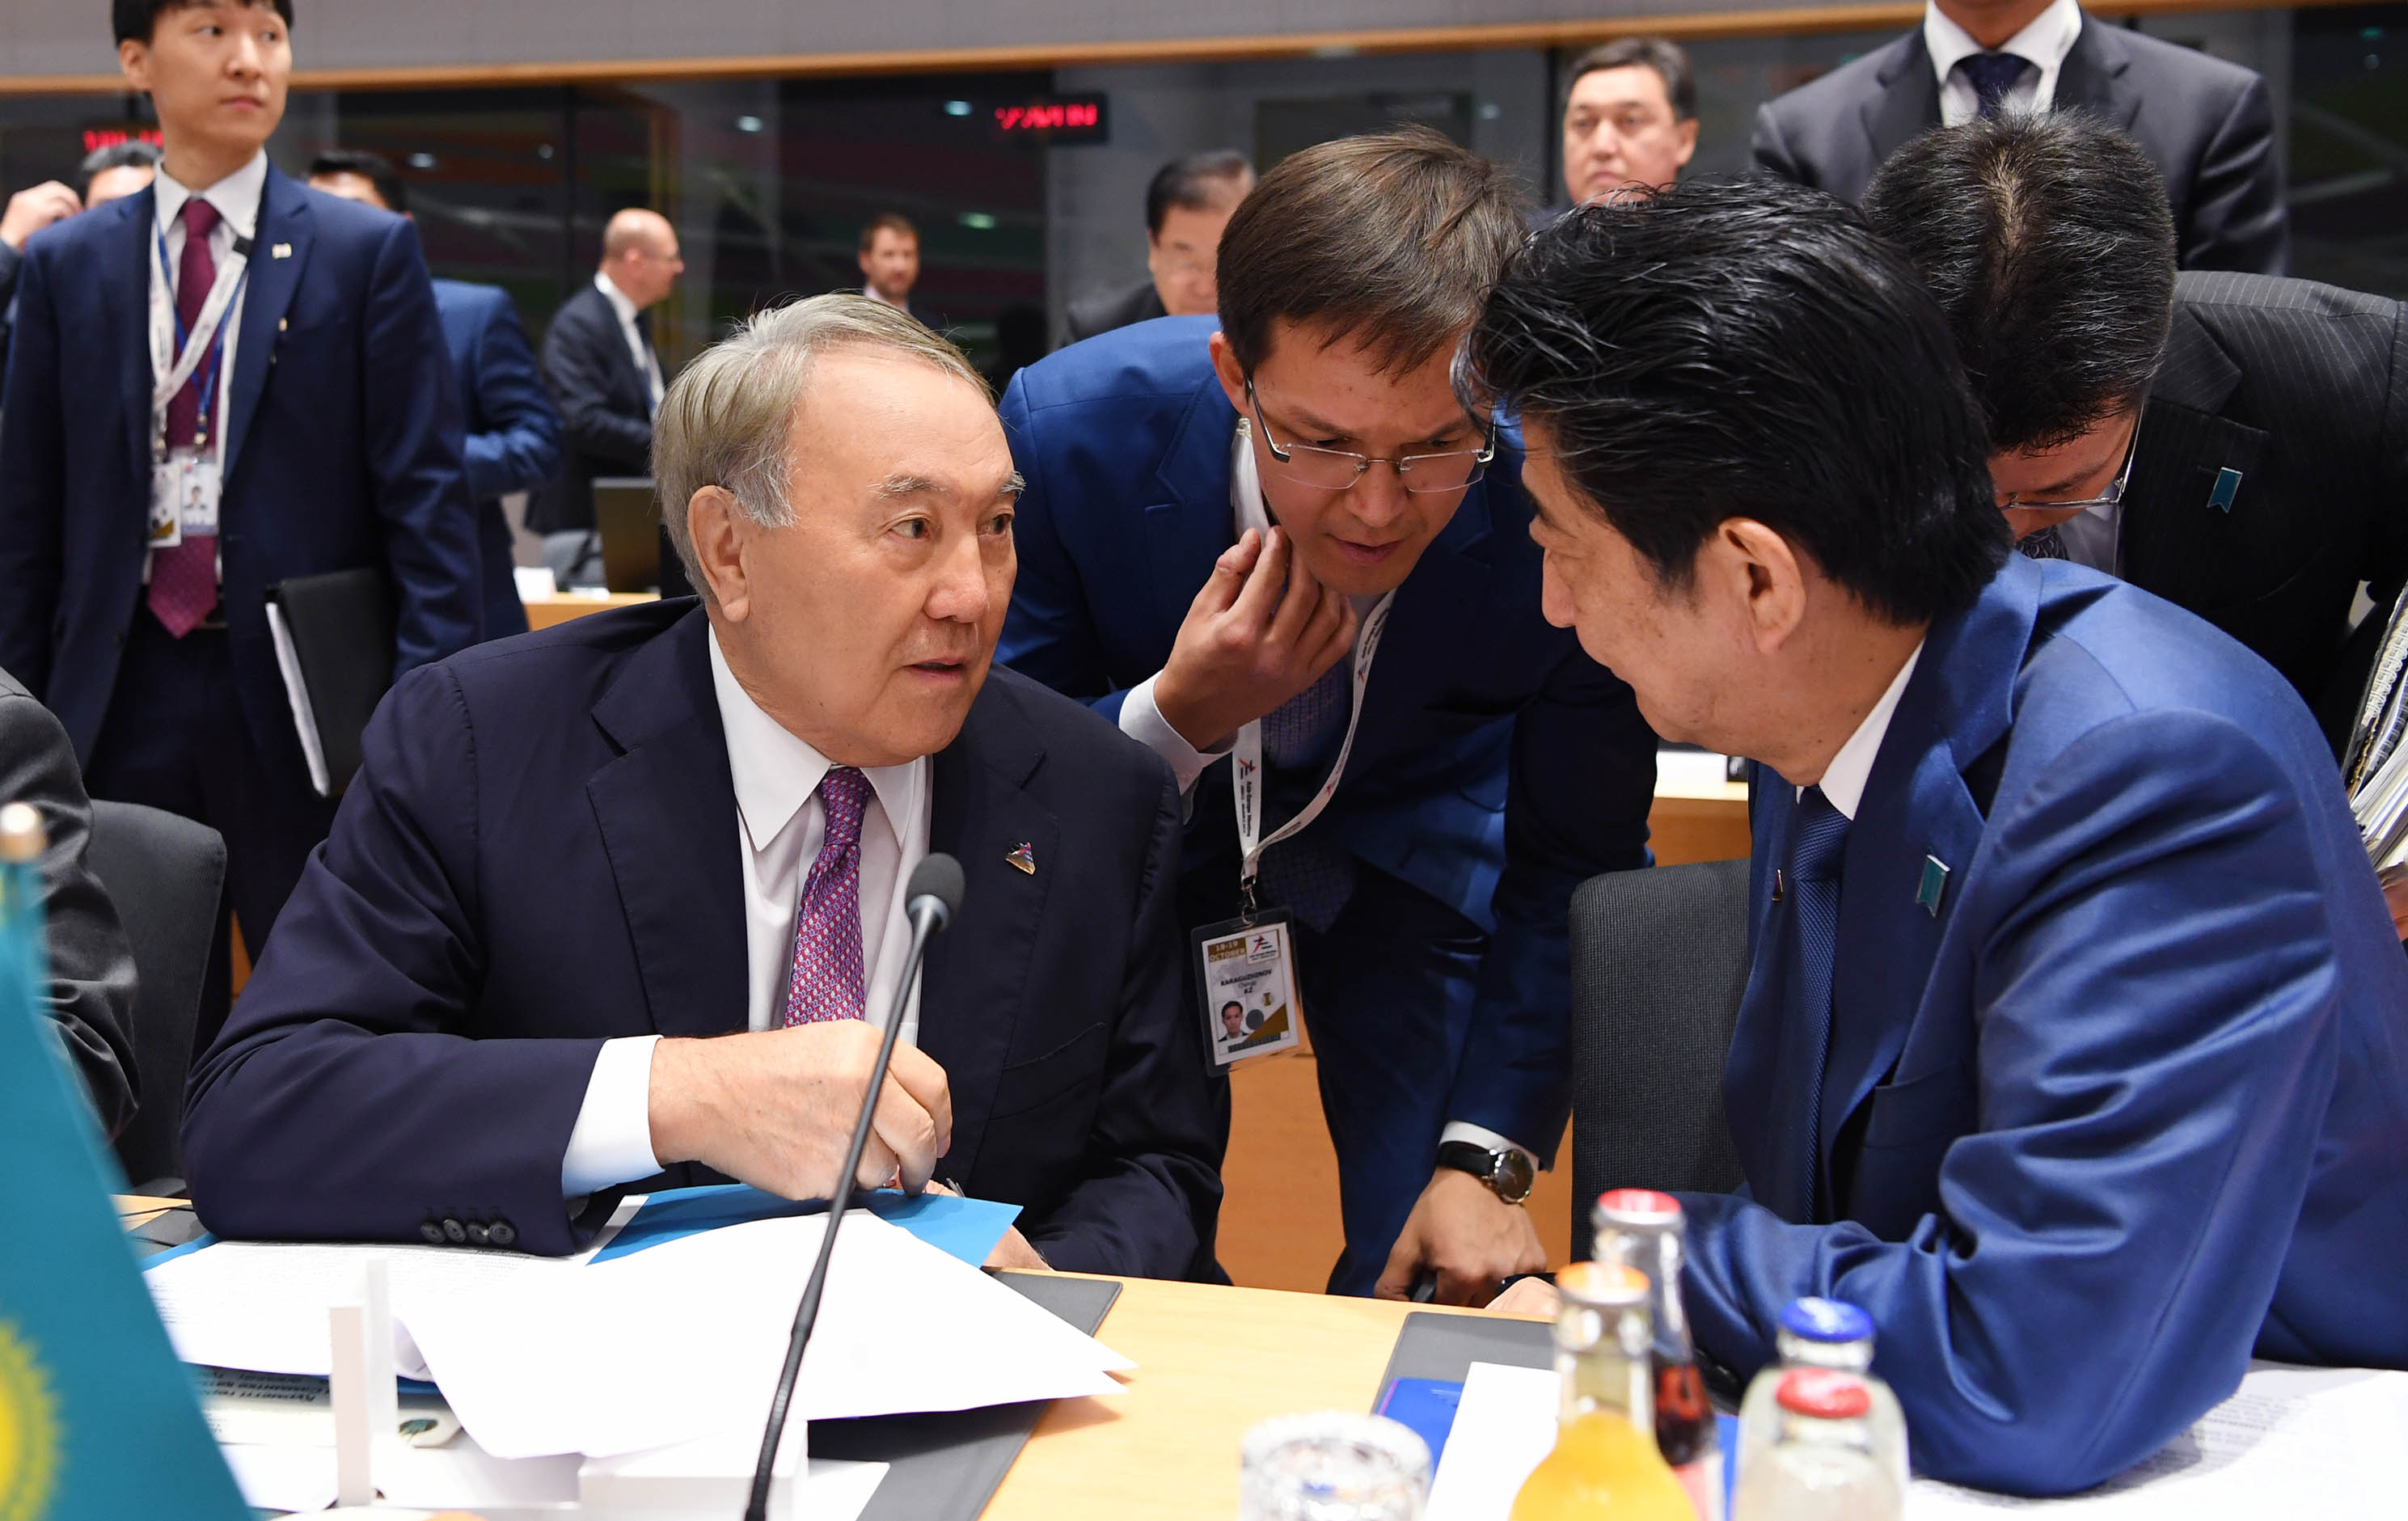 Kazakh President meets with Shinzo Abe and Moon Jae-In